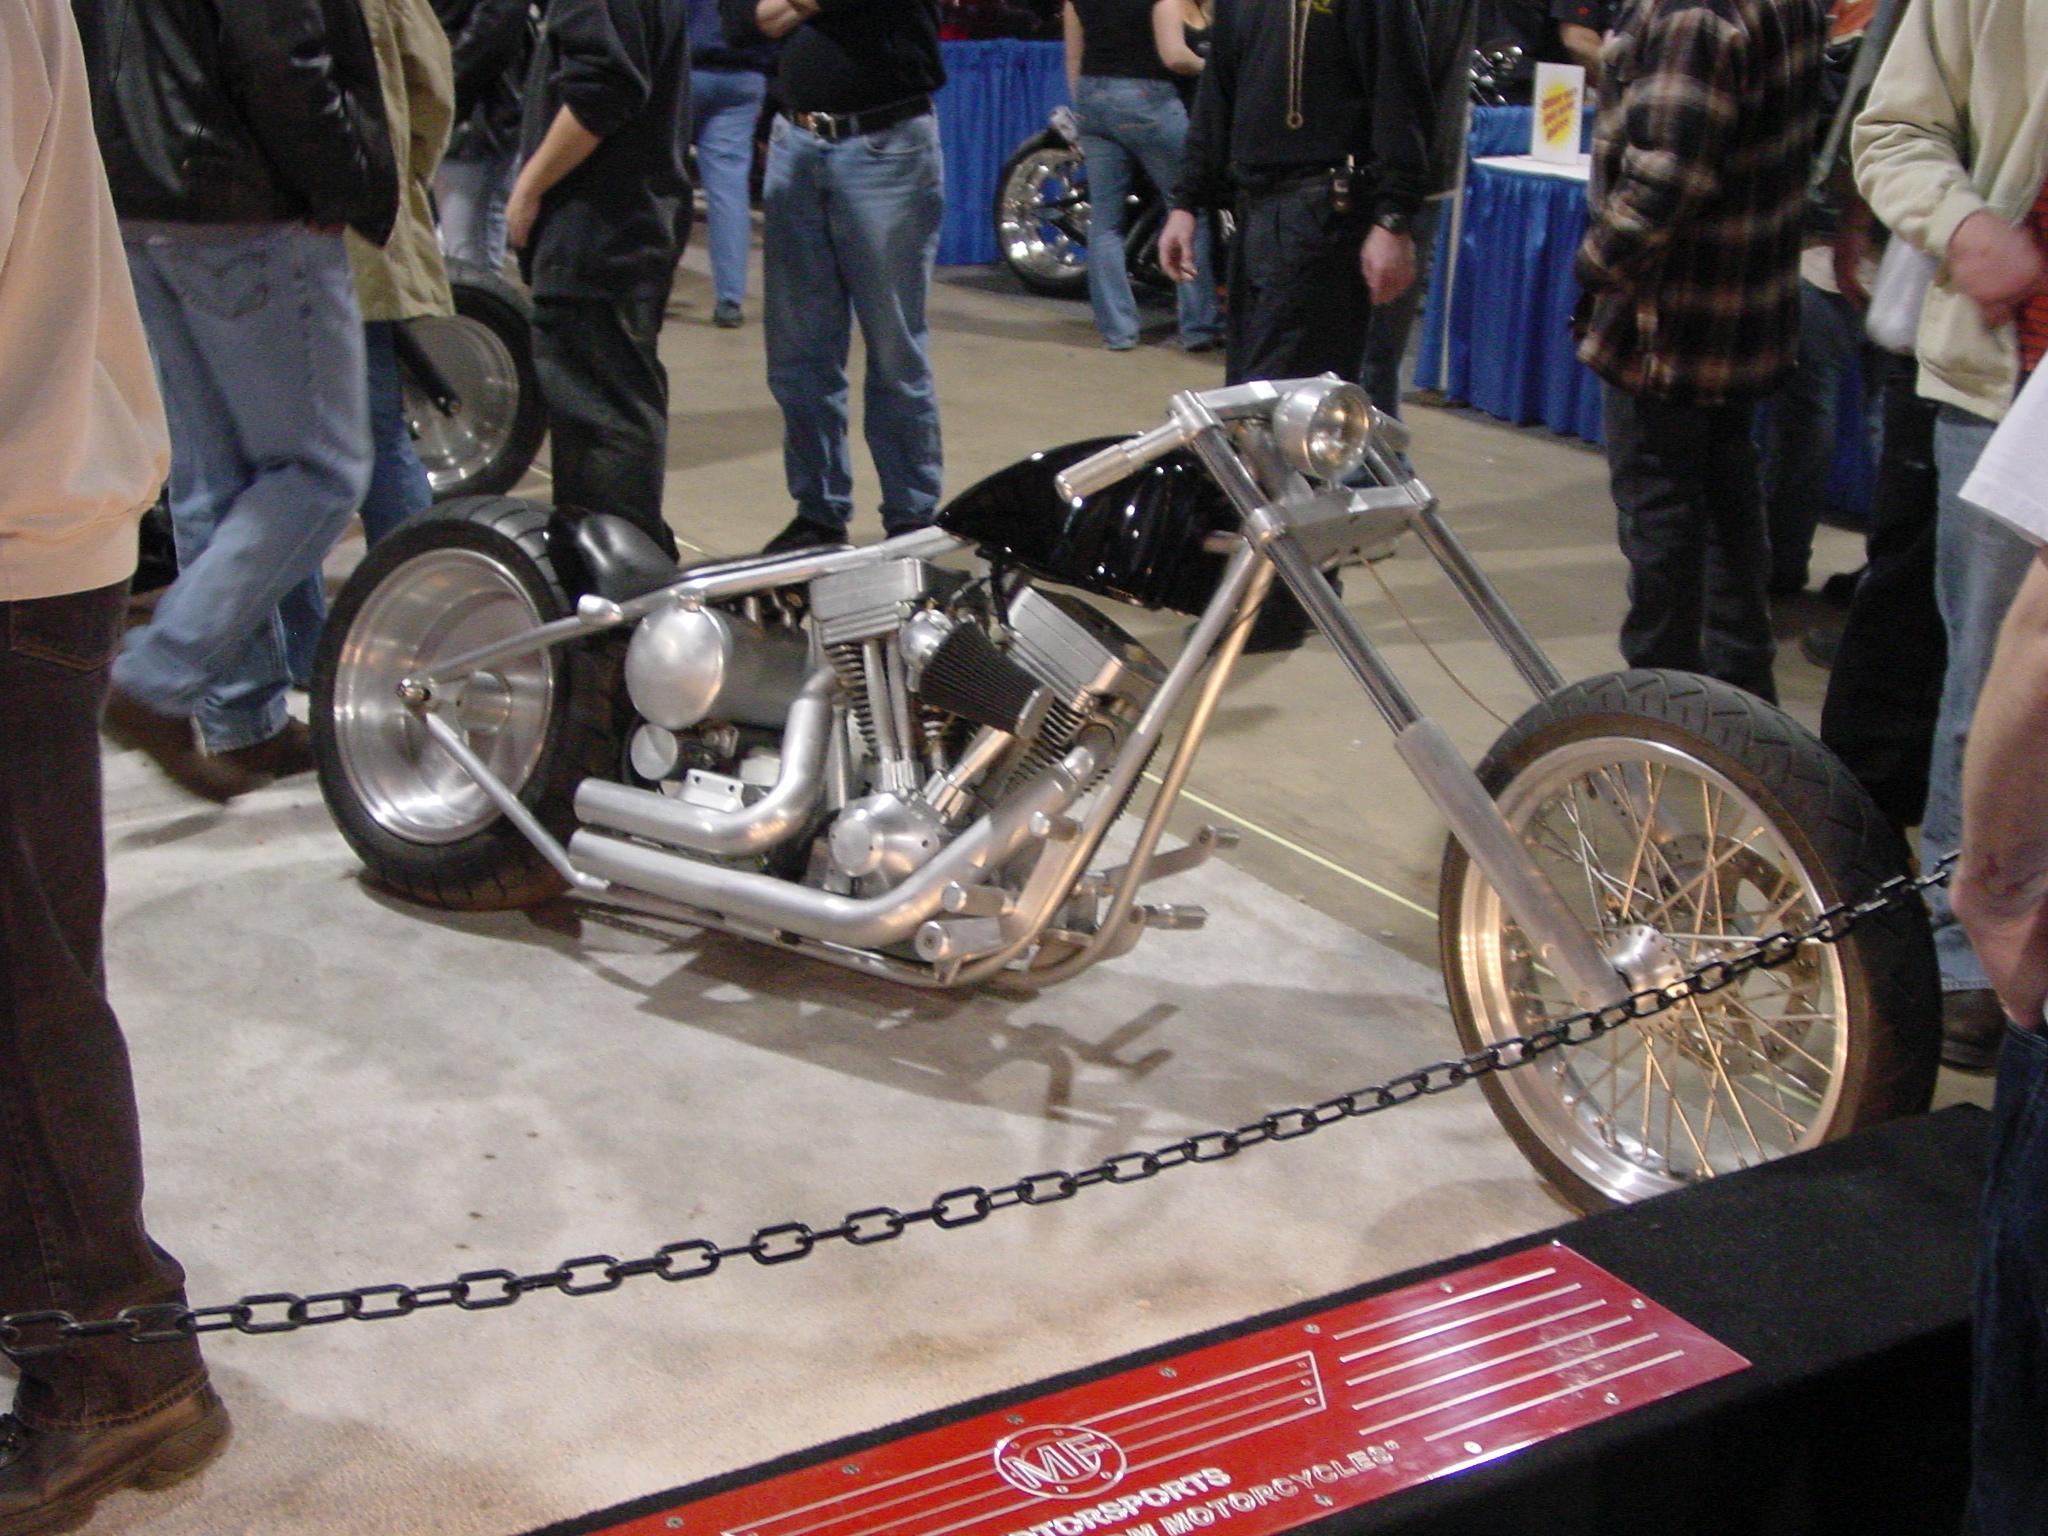 pictures west coast choppers wallpapers west coast choppers Car 2048x1536